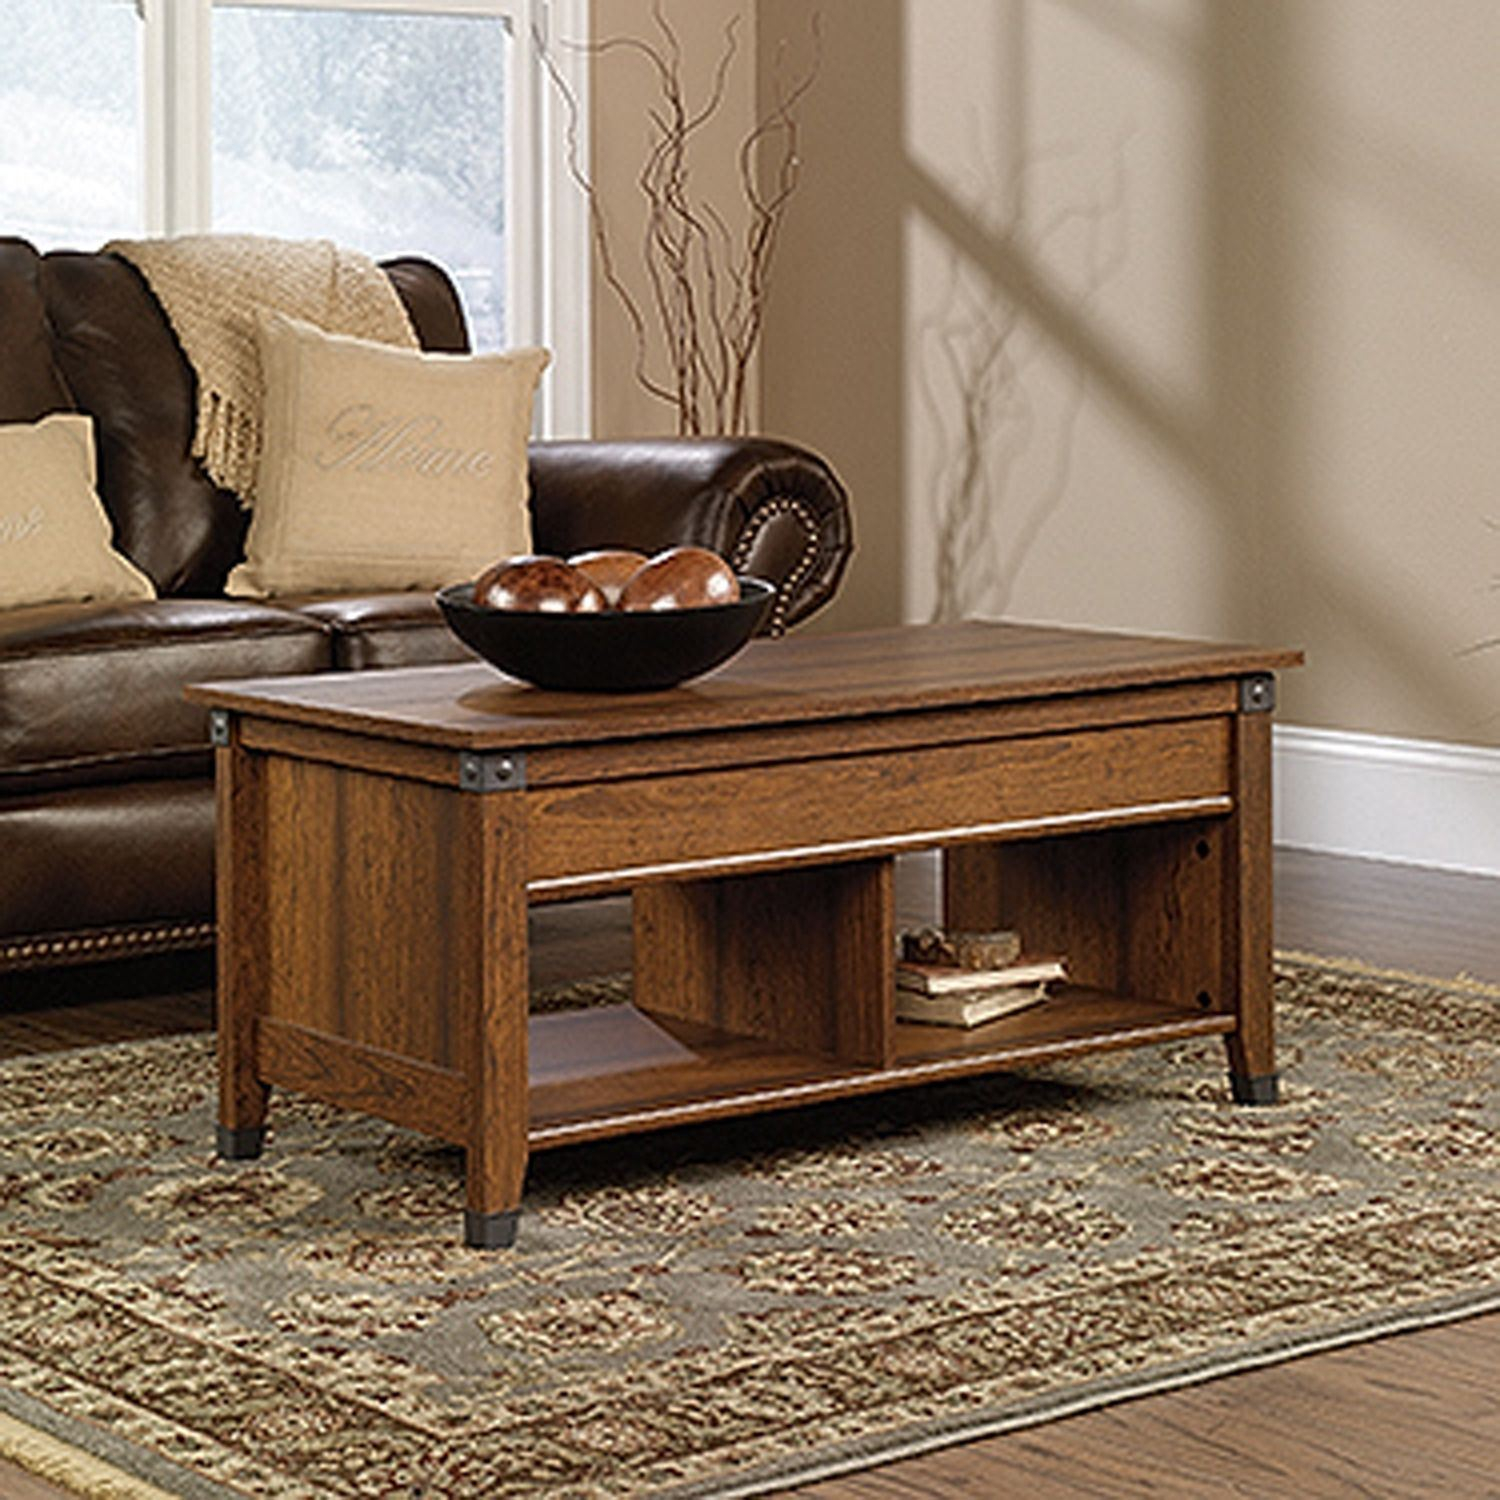 Carson Forge Lift Top Coffee Table Washington Cher 414444 Sauder pertaining to size 1500 X 1500